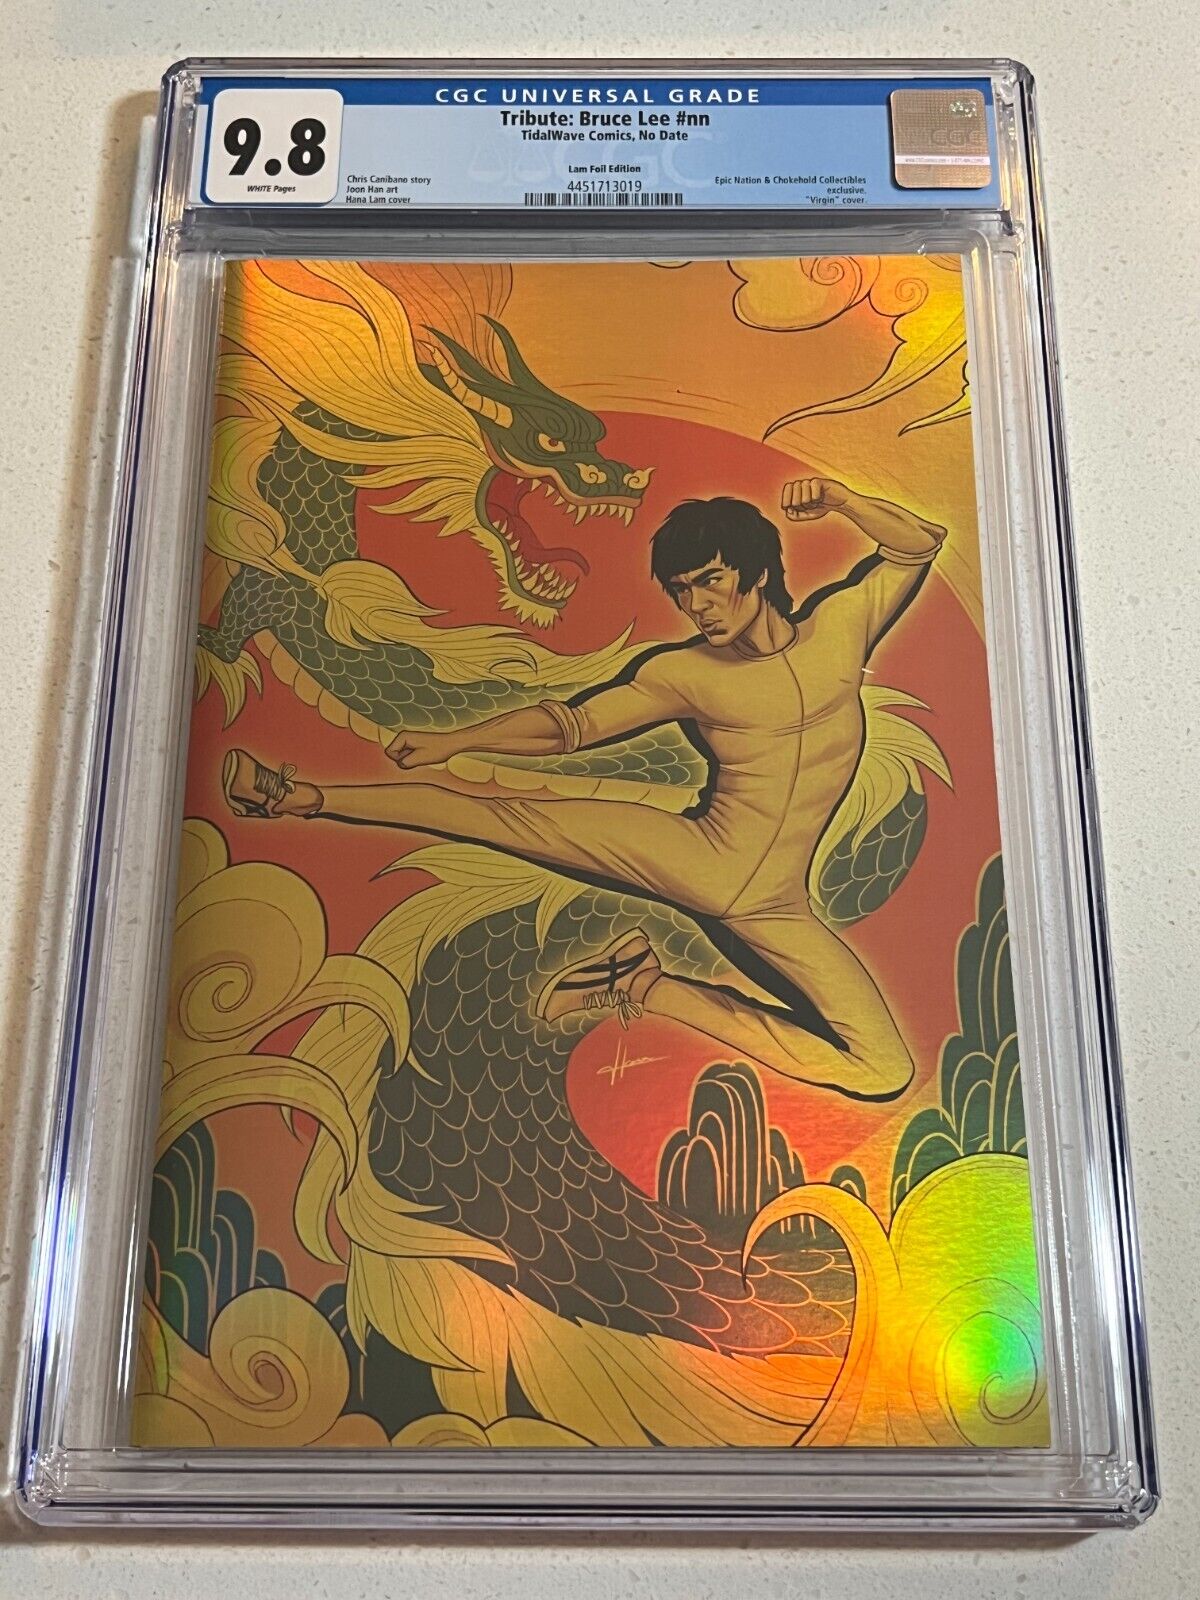 Tribute Bruce Lee Gold Foil Lam Cover Limited to 10 CGC 9.8